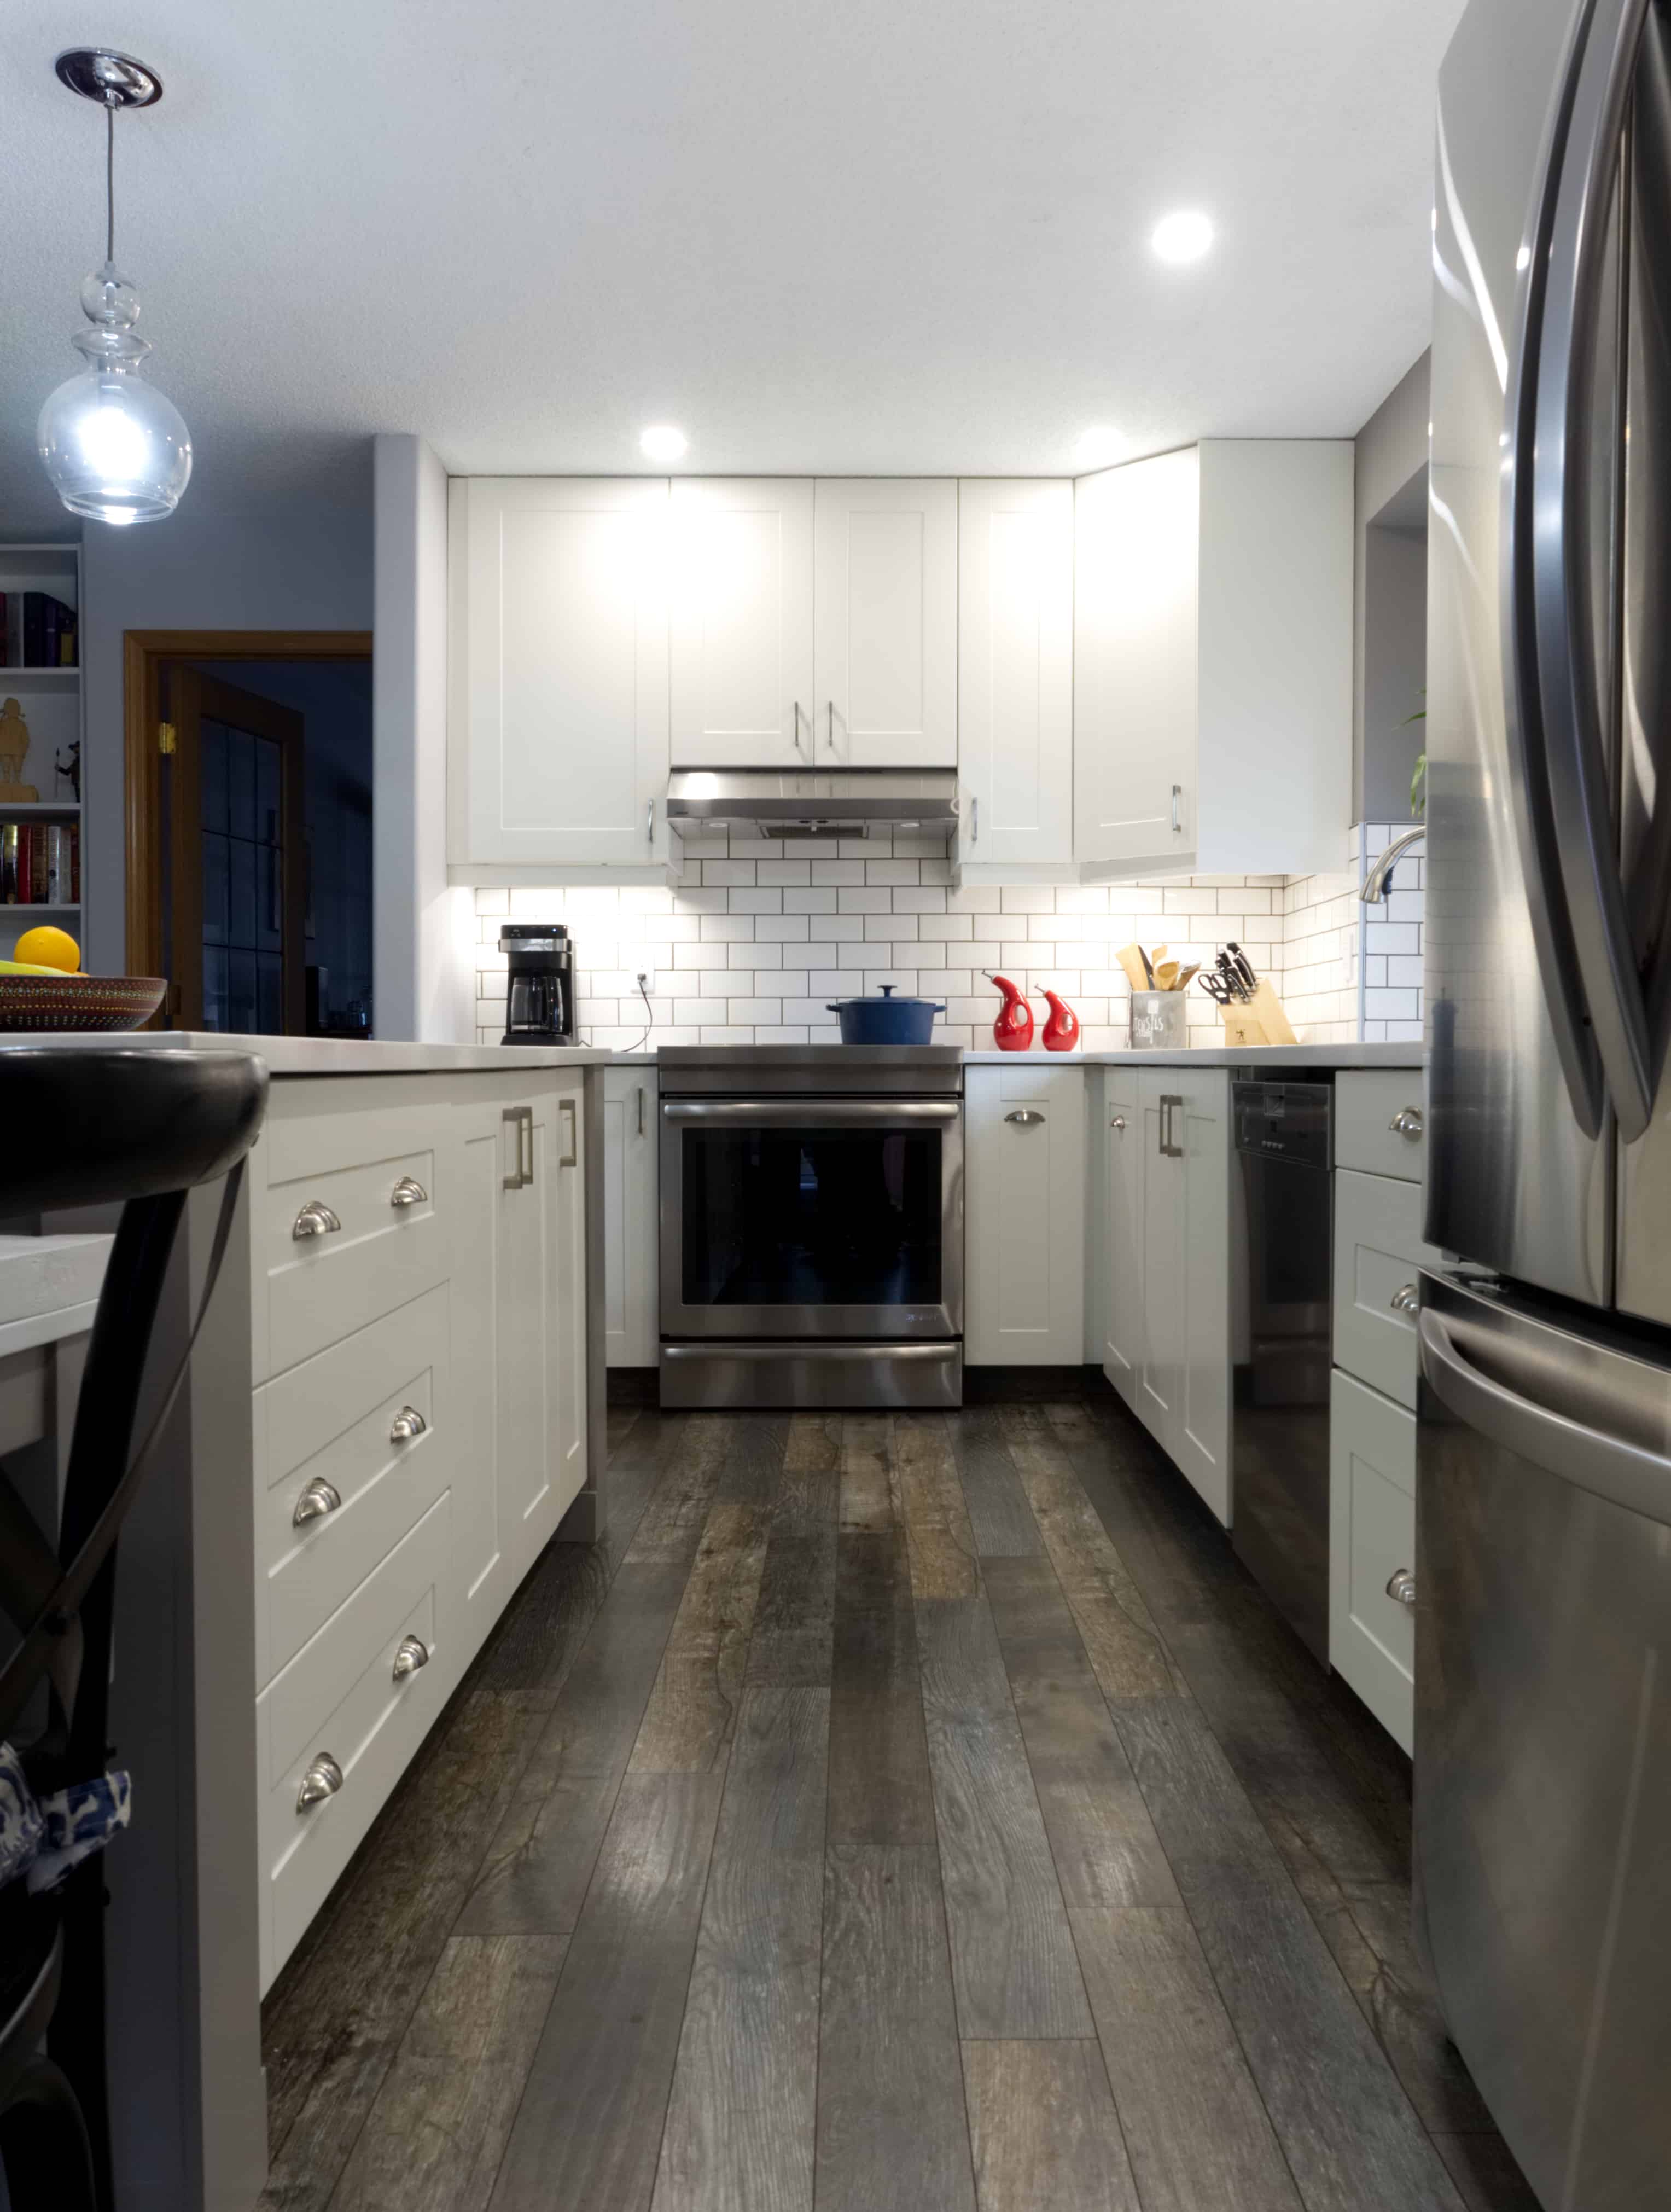 ikea kitchen review: pros, cons, and overall quality - the